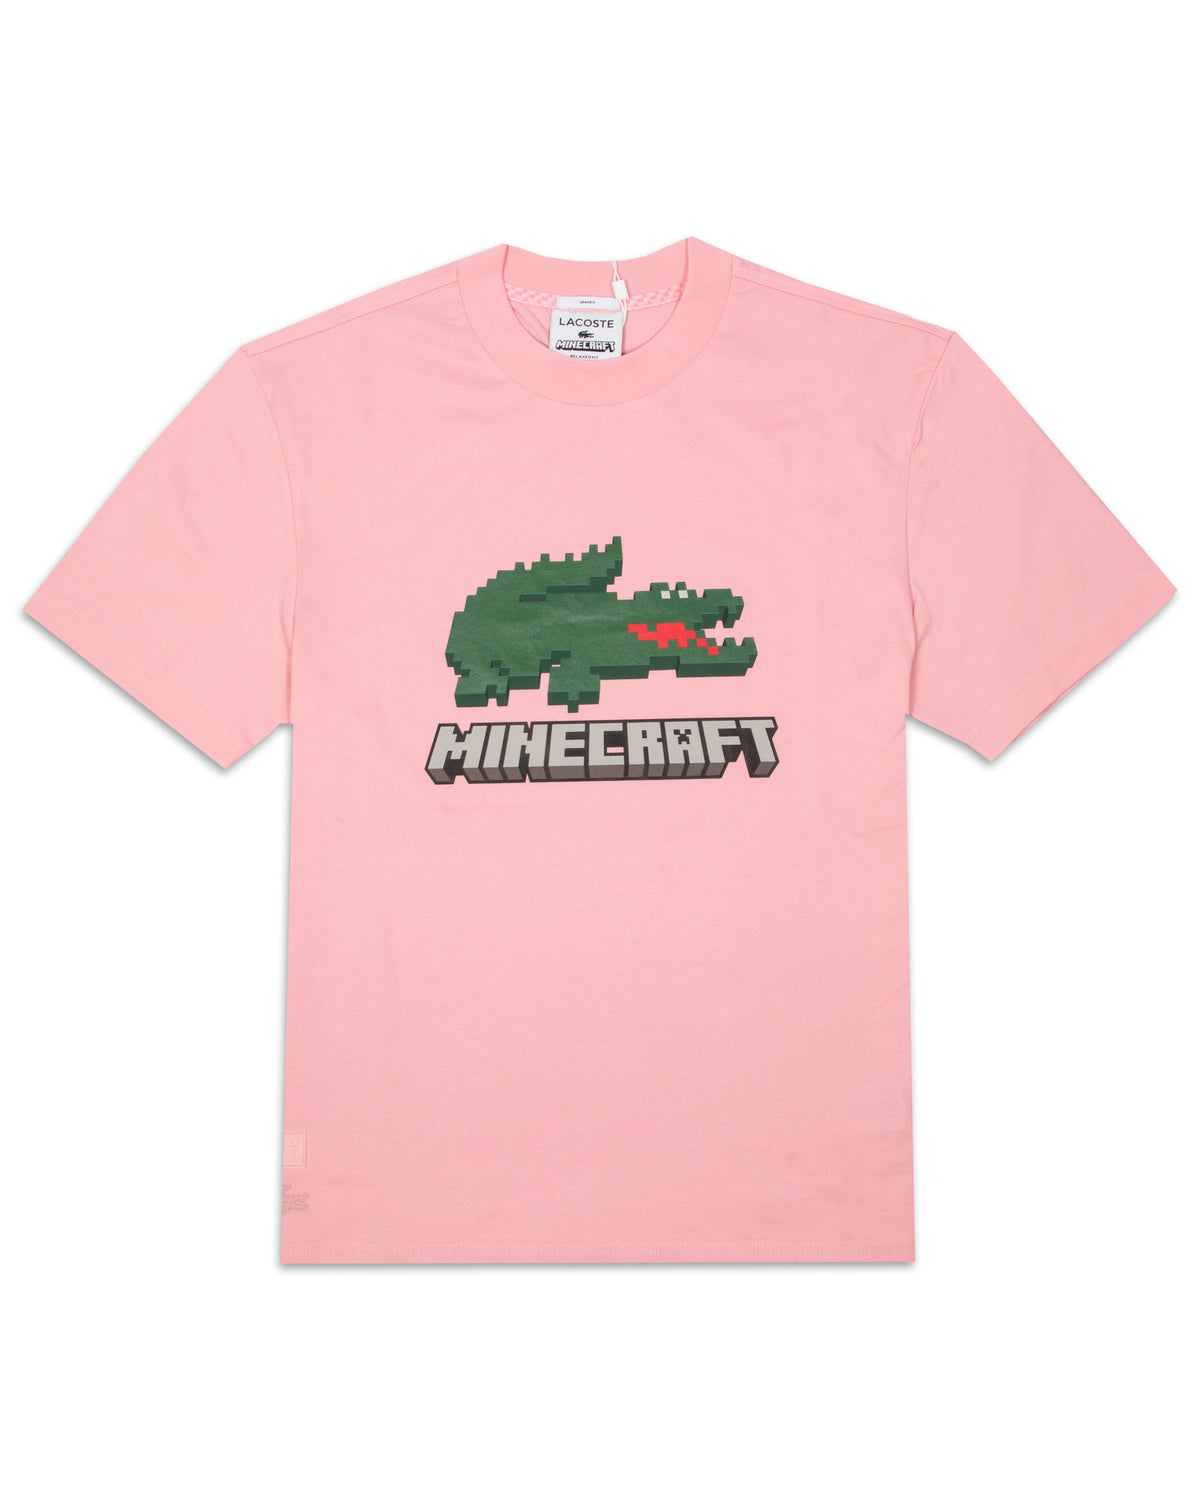 Lacoste x Minecraft T-Shirt Pink TH5038-7SY